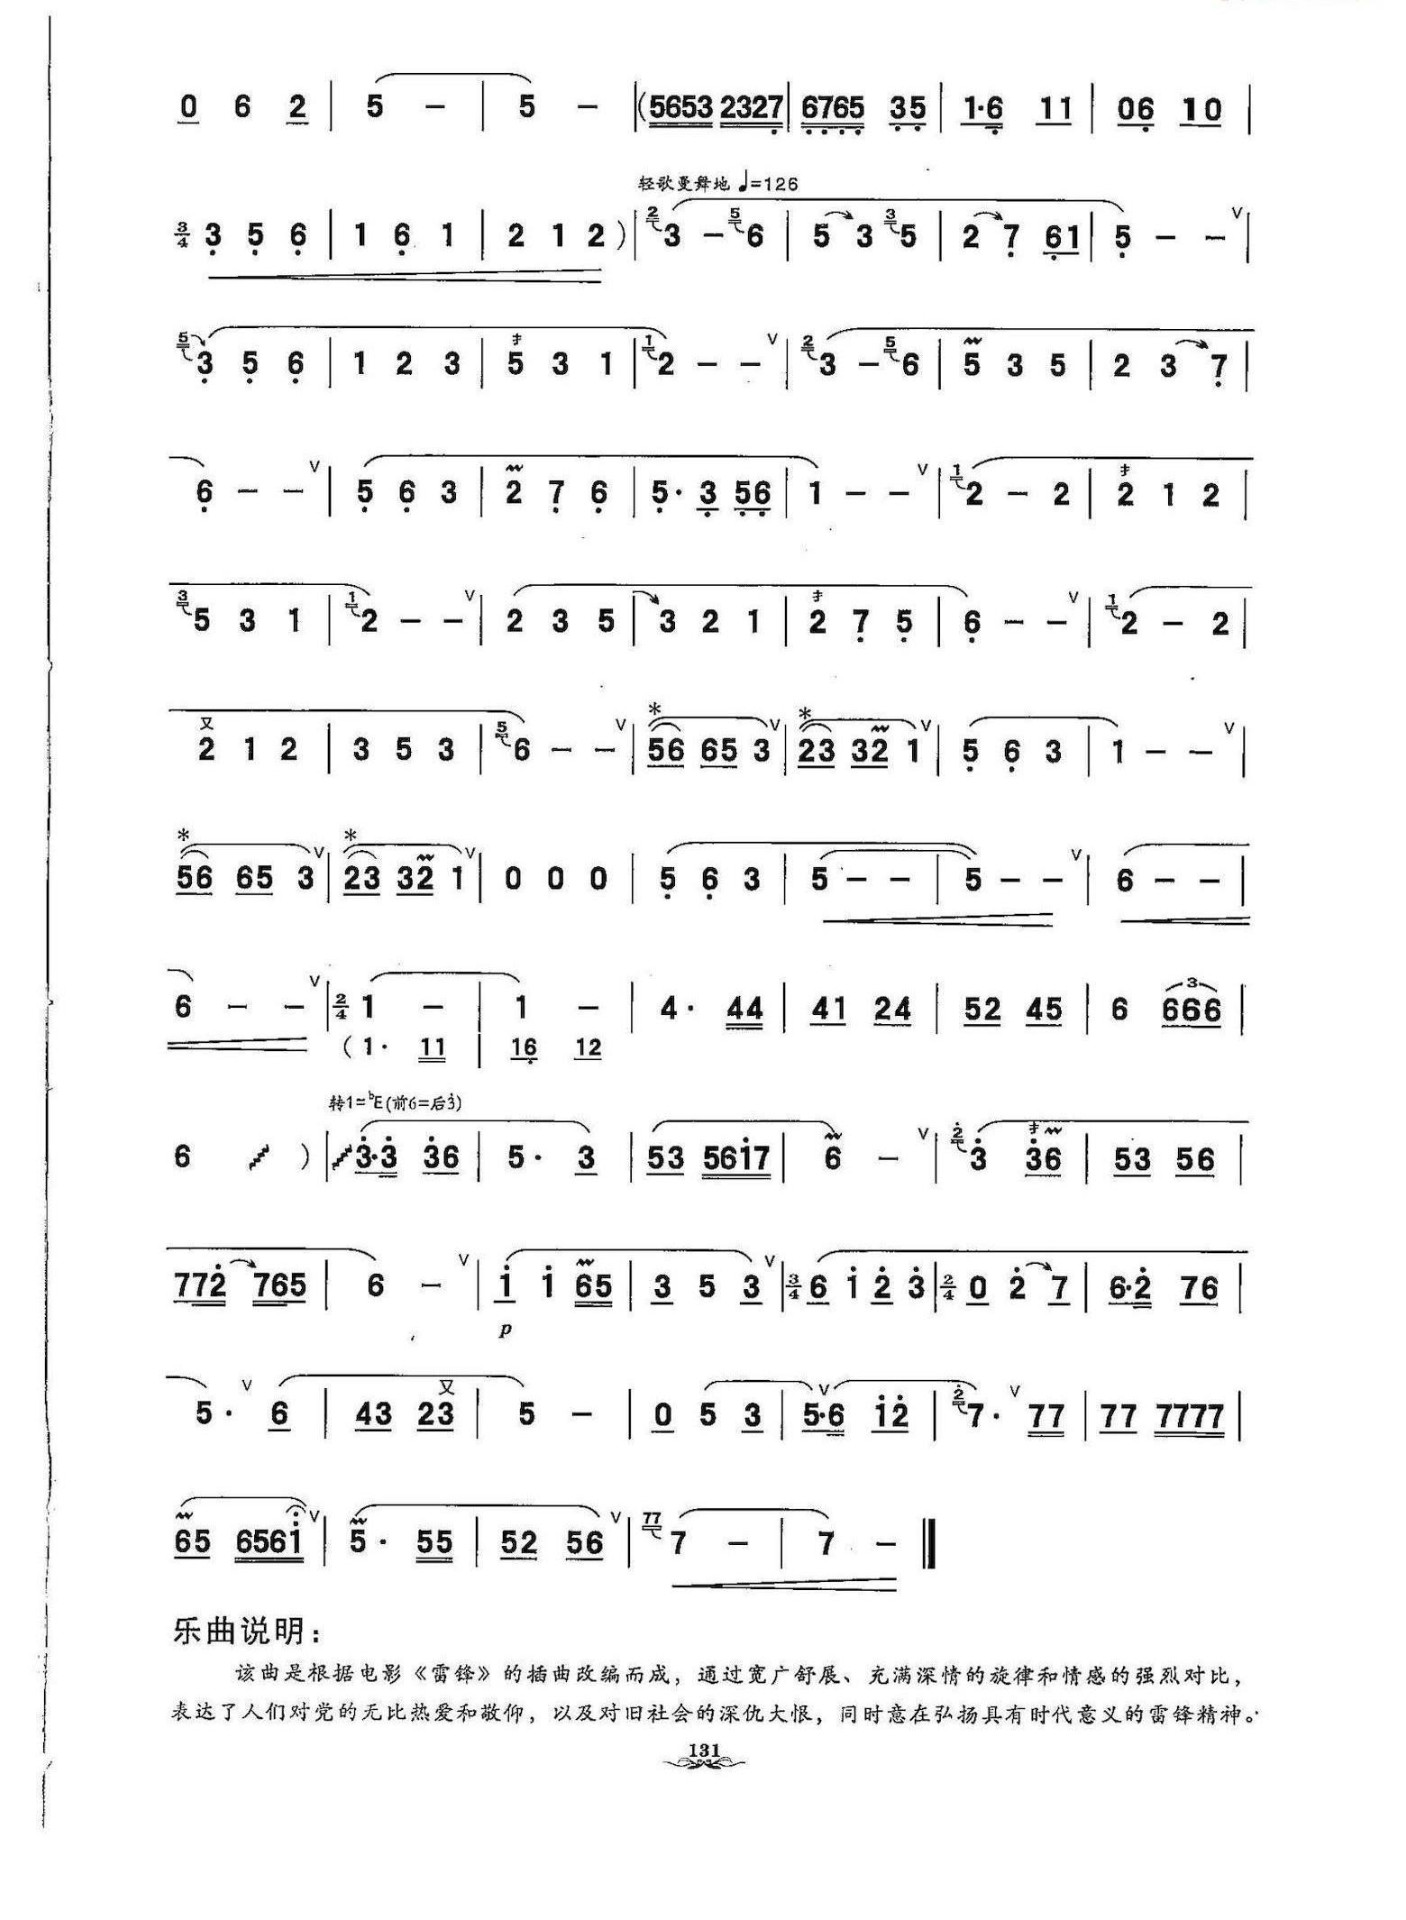 Then play folk songs for the party（xun sheet music）